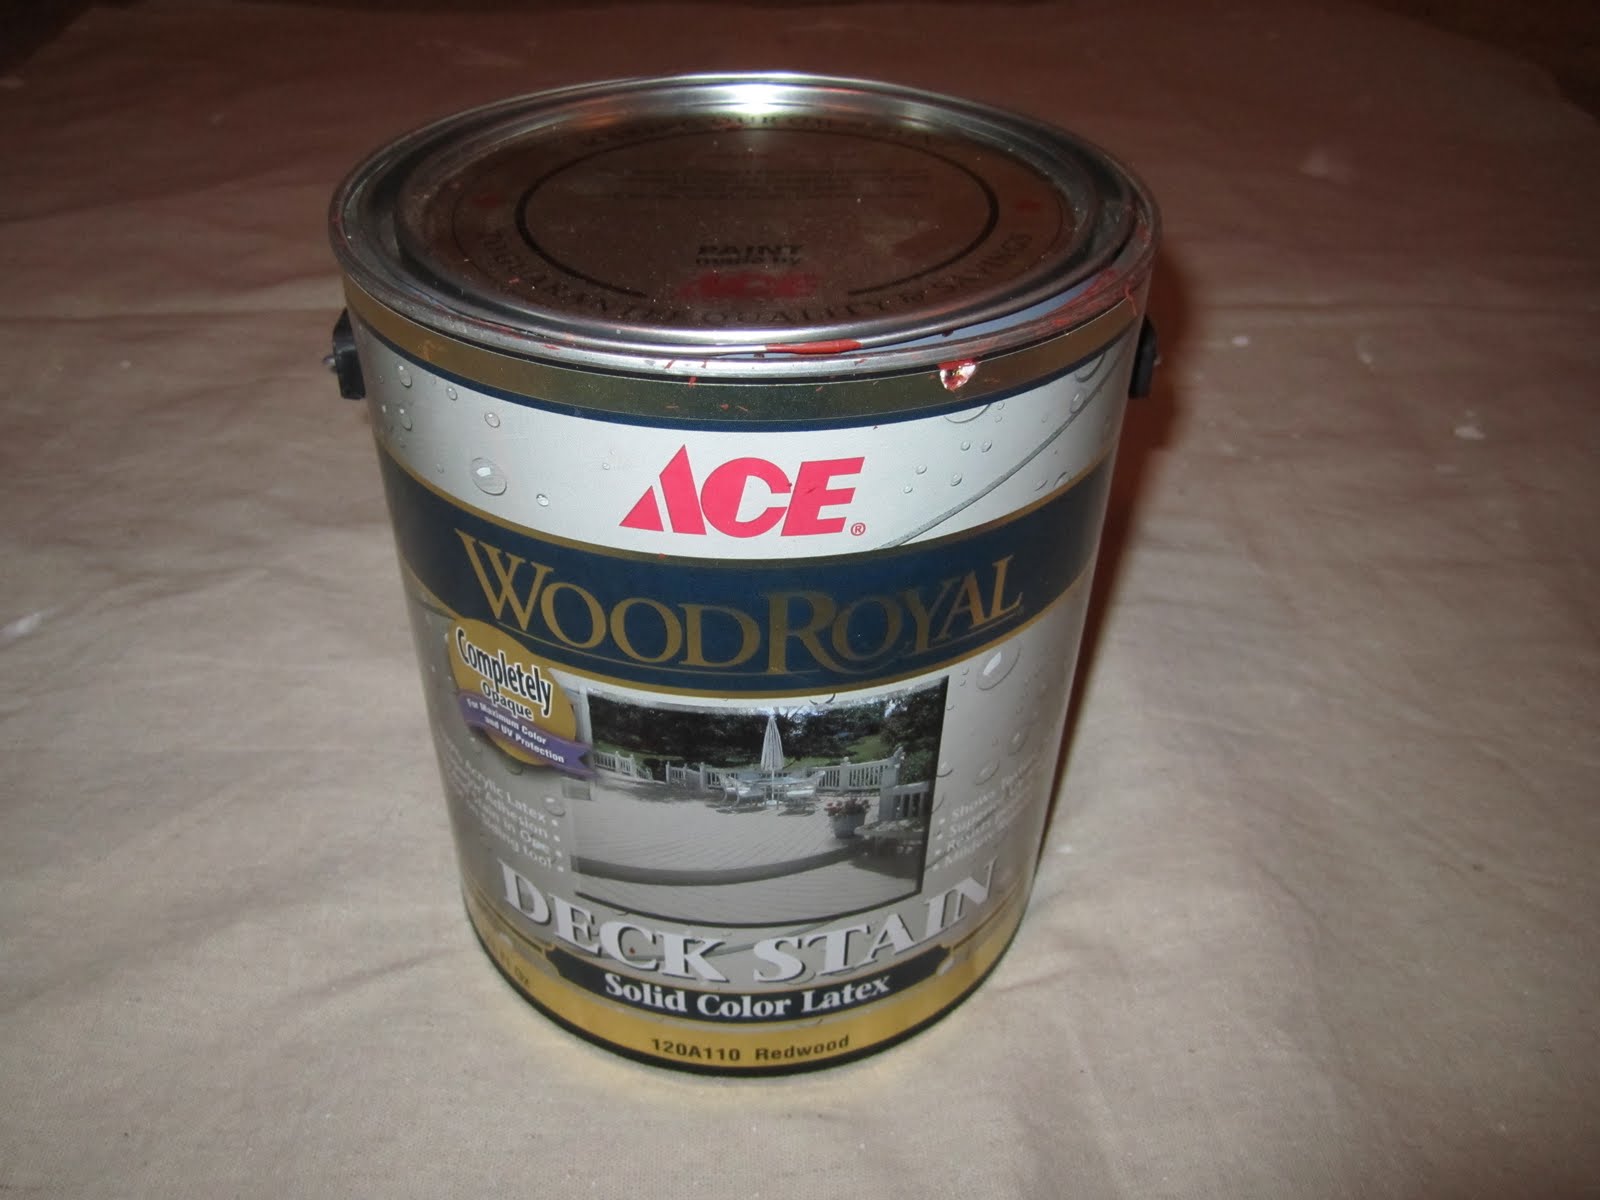 Ace Wood Royal Solid Color Latex Deck Stain Review House